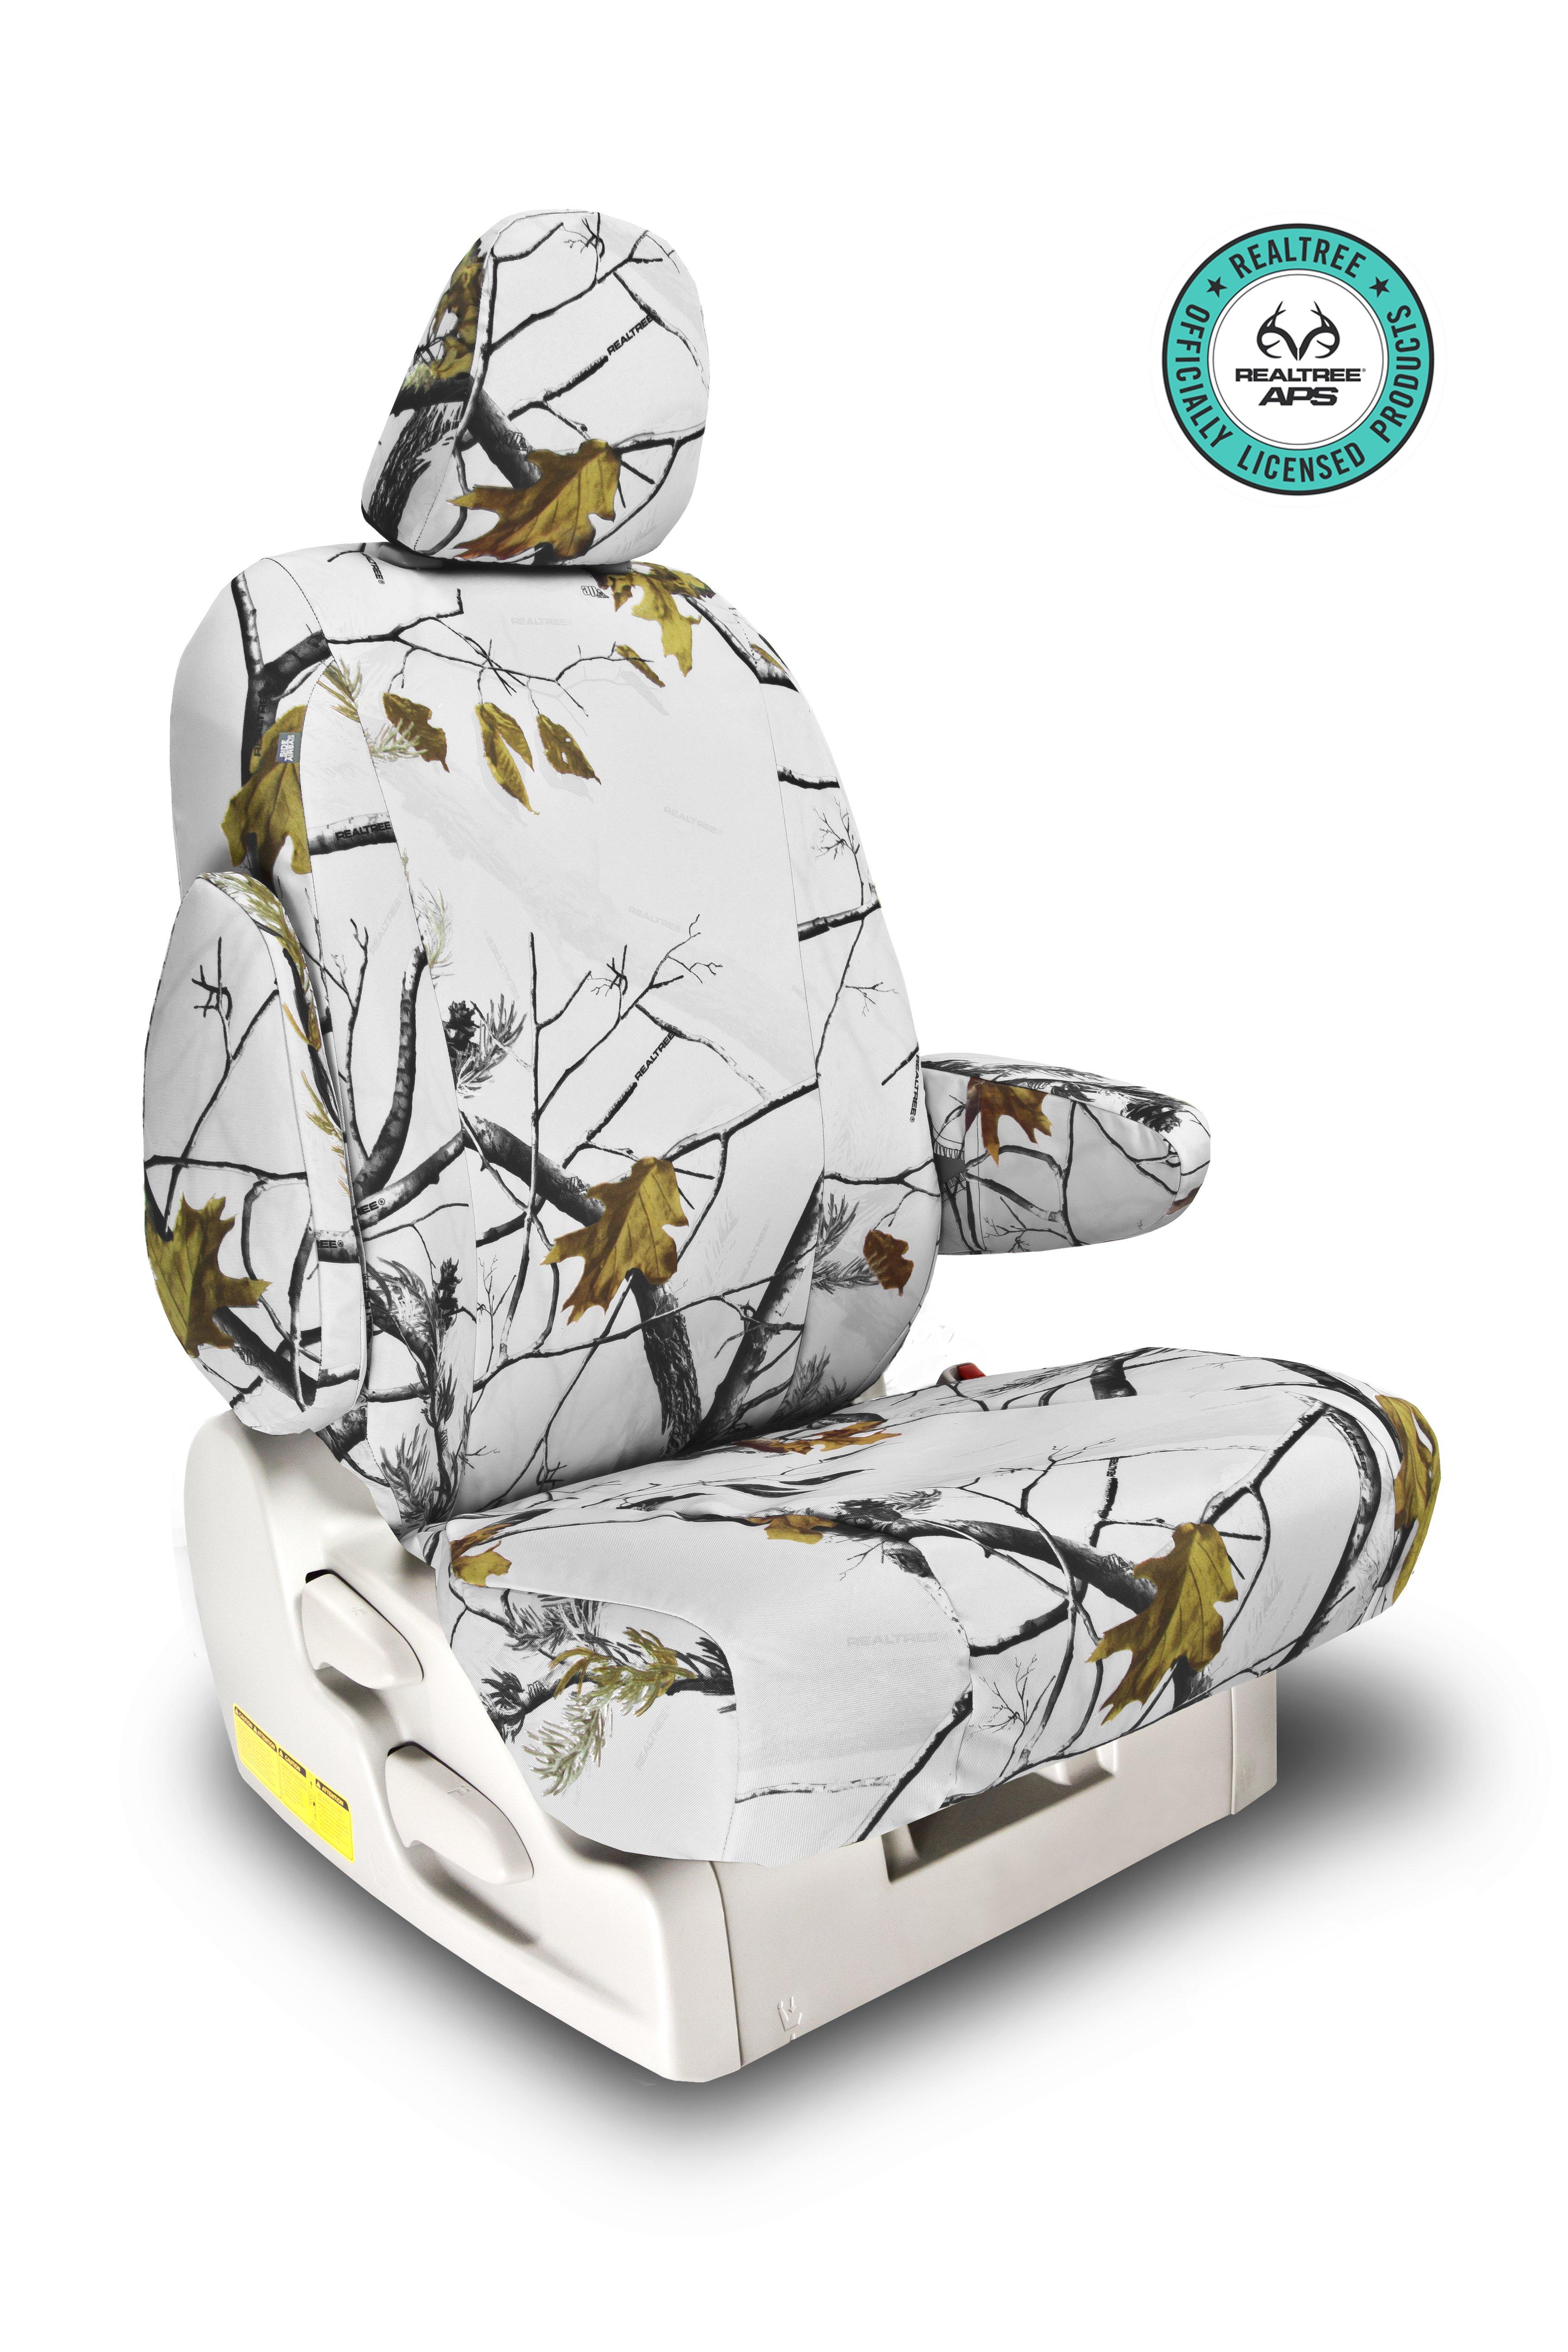 Realtree Custom-Fit Seat Covers